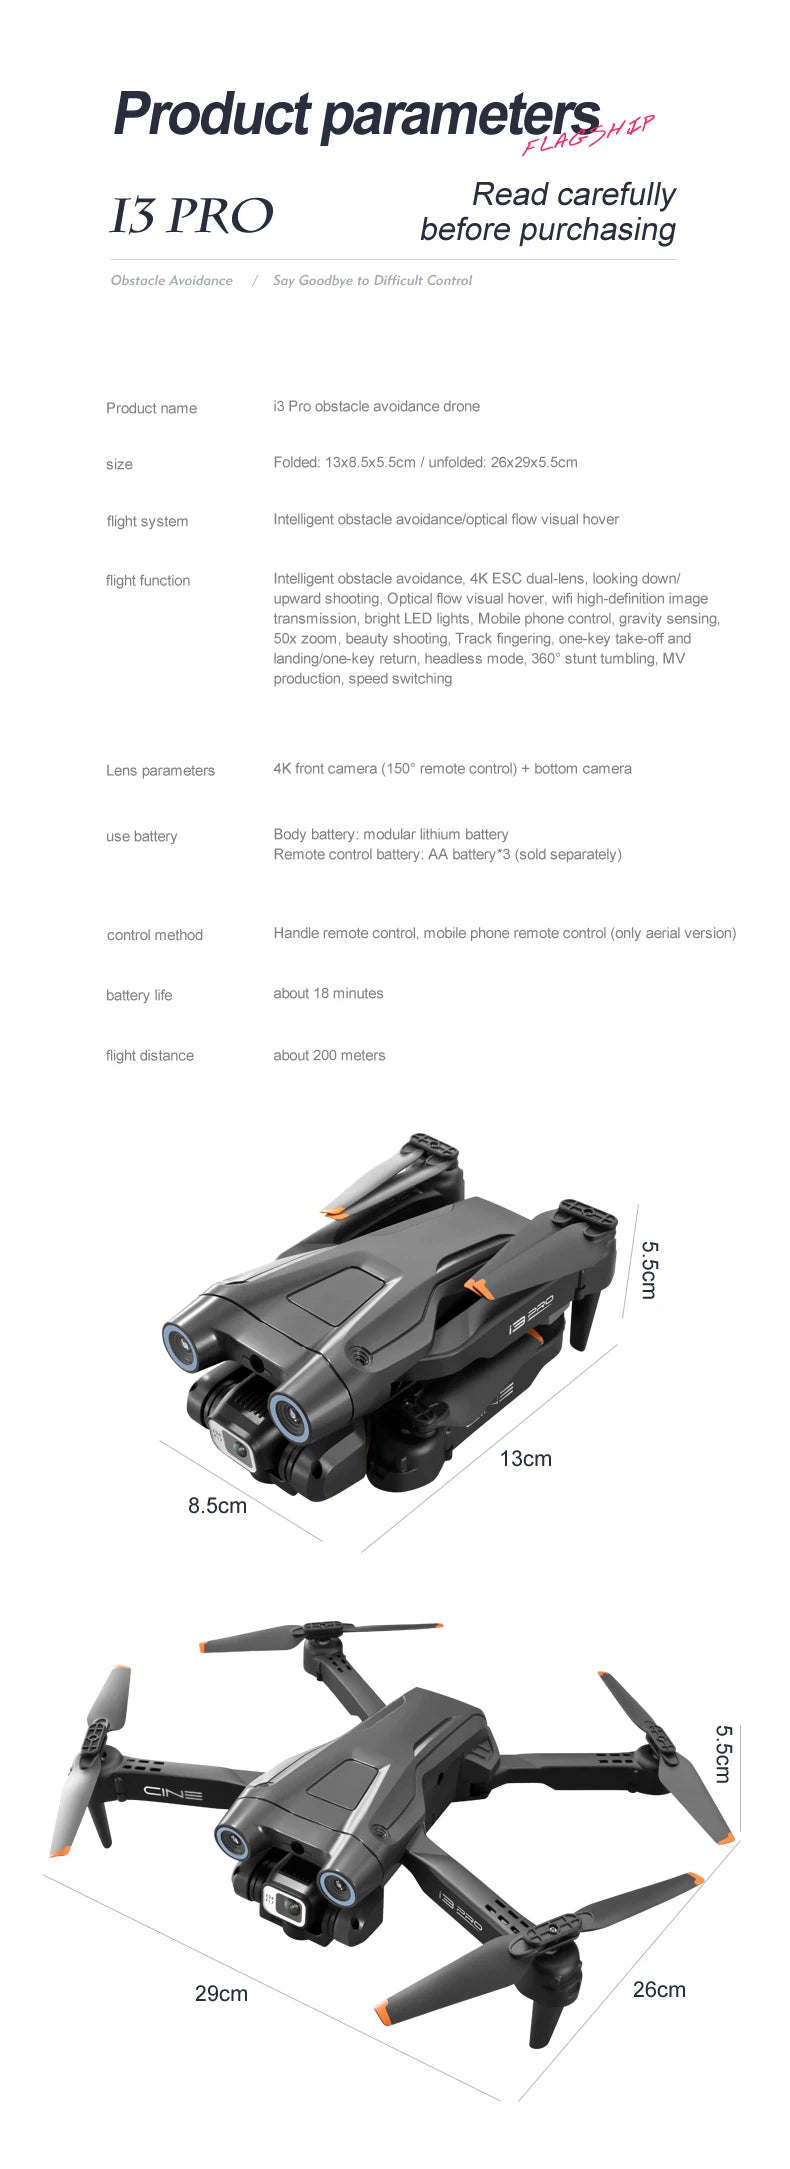 XYRC New i3 Pro Drone, uav is equipped with front left and right three-way